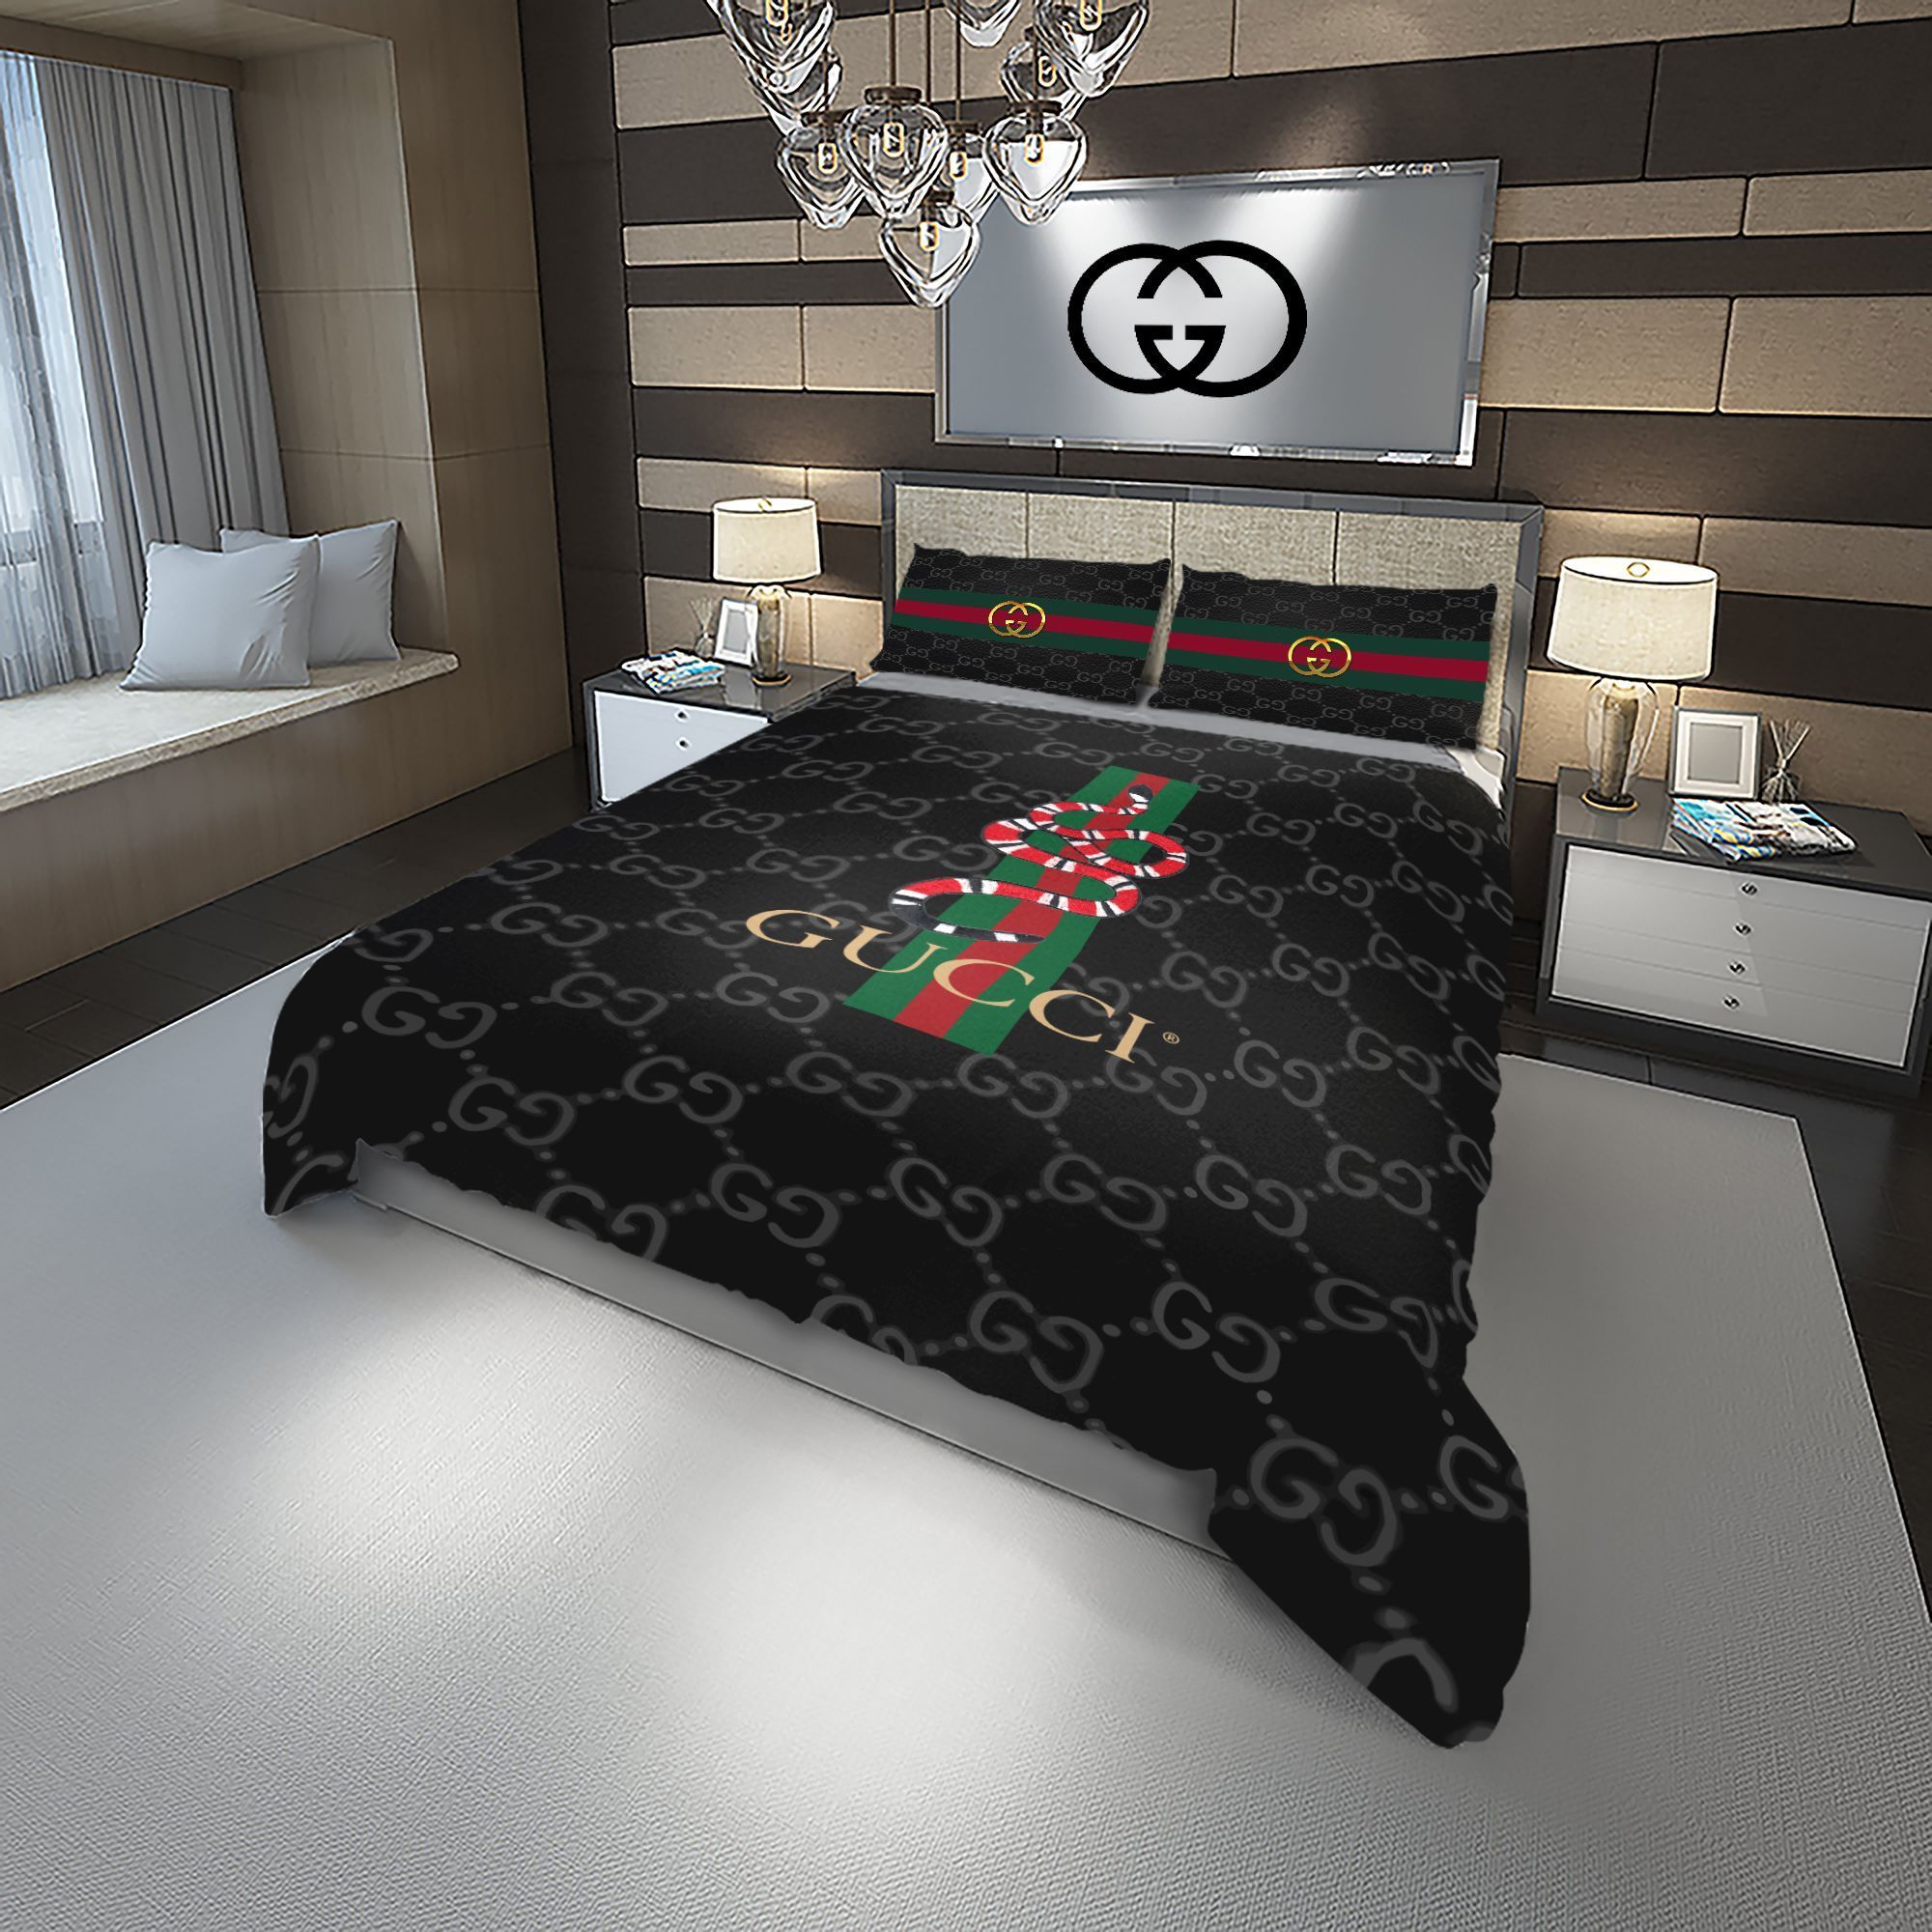 Let me show you about some luxury brand bedding set 2022 100